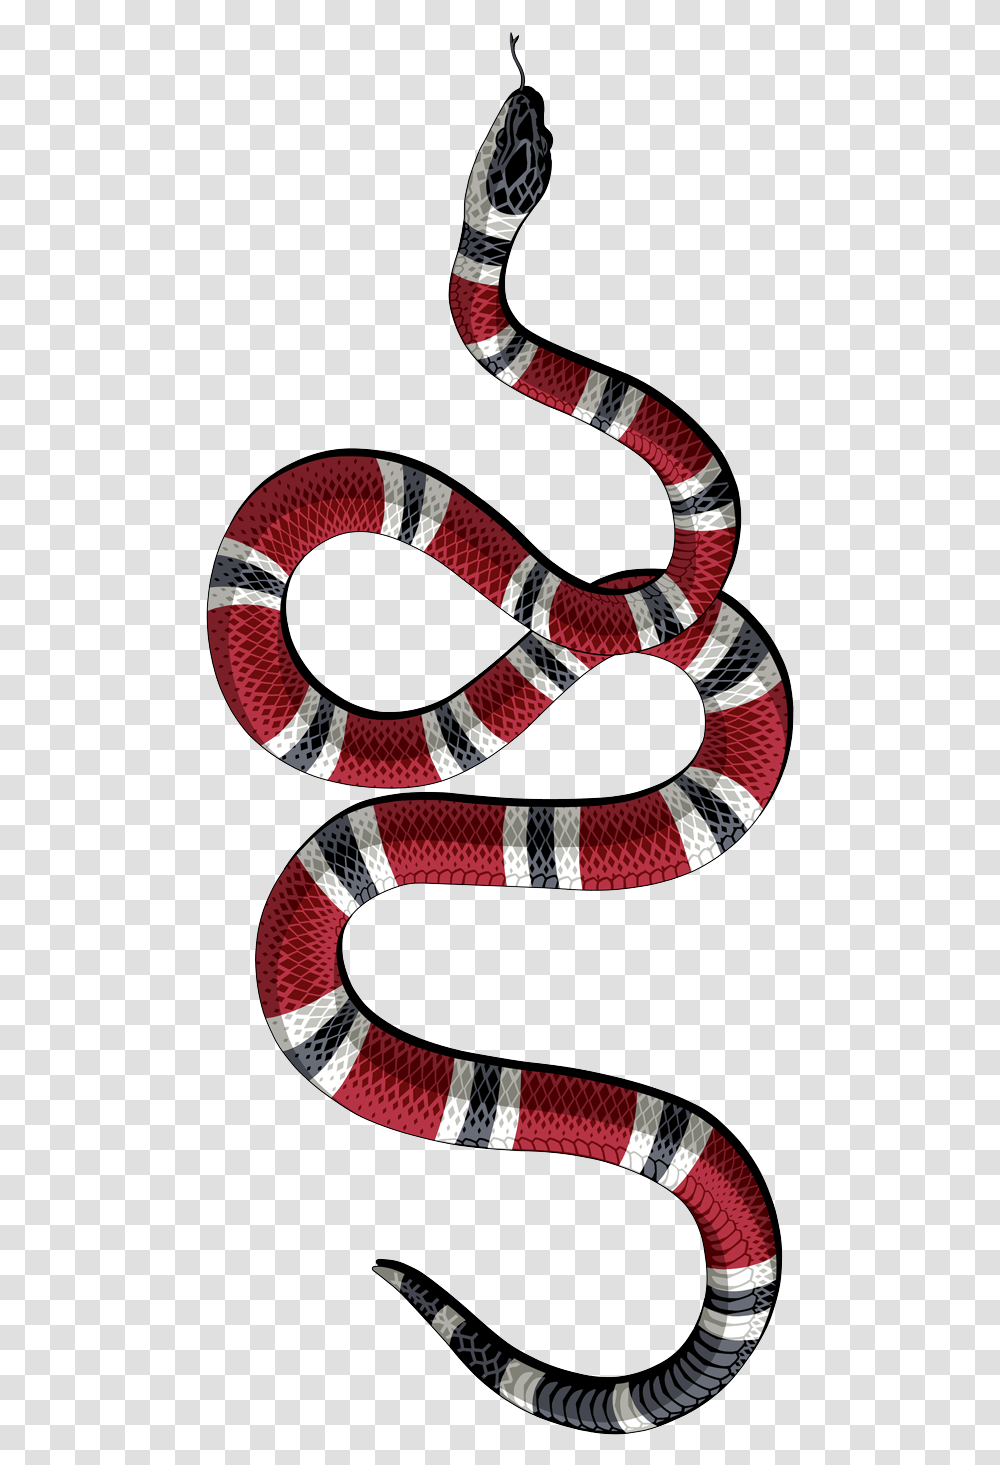 Decal Kingsnakes Gucci Sticker Serpent Free Photo Gucci Snake Logo, King Snake, Reptile, Animal Transparent Png